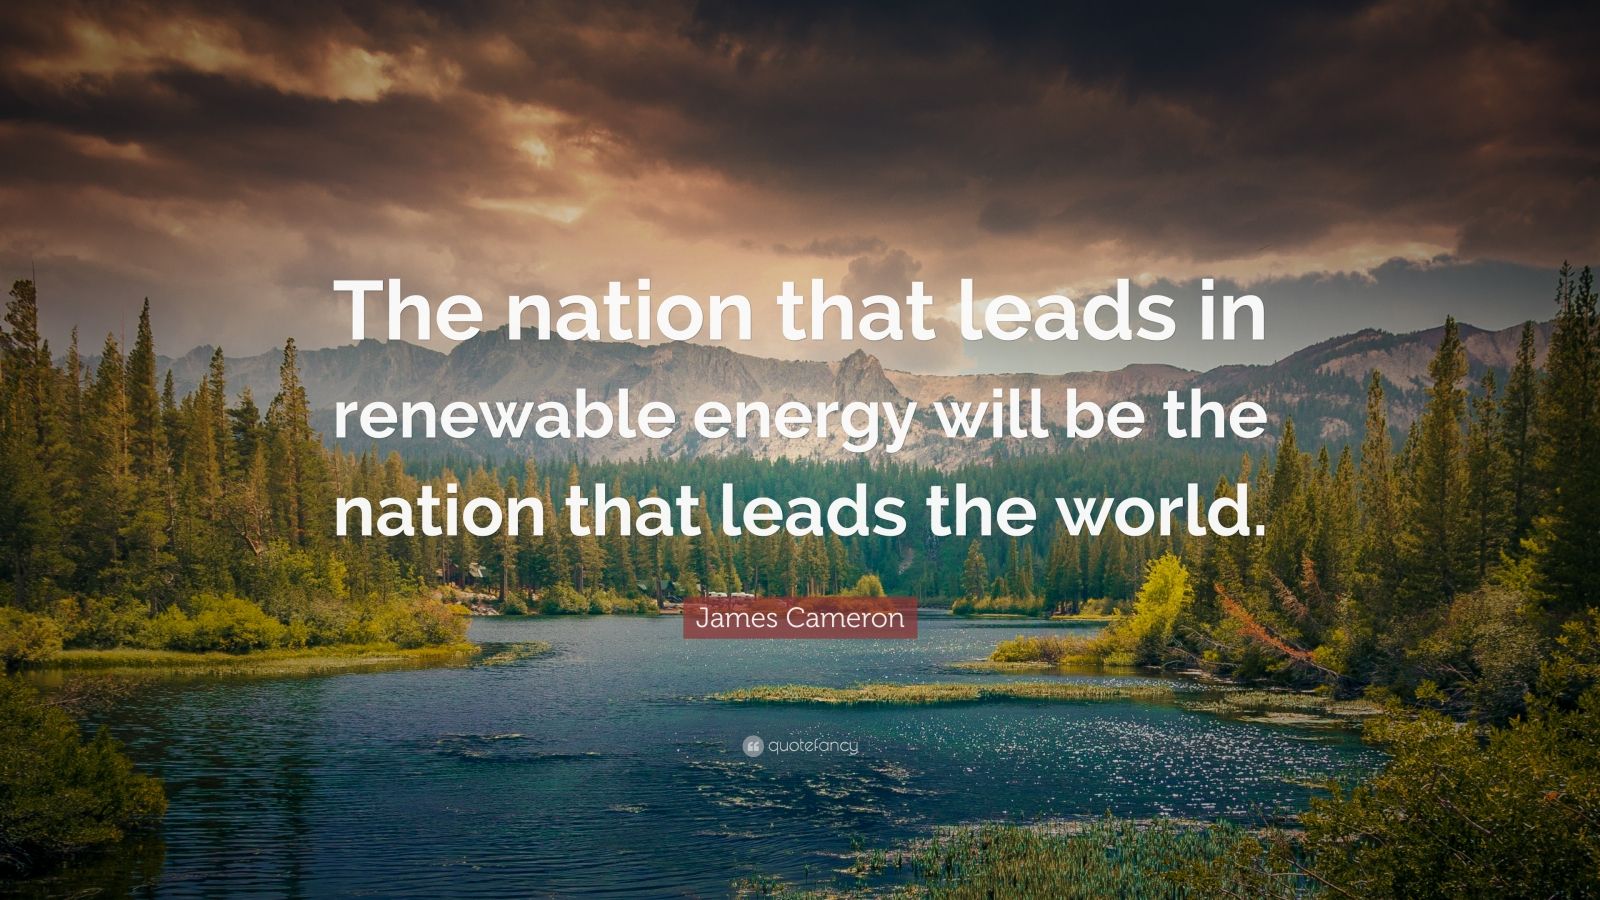 James Cameron Quote: “The nation that leads in renewable energy will be